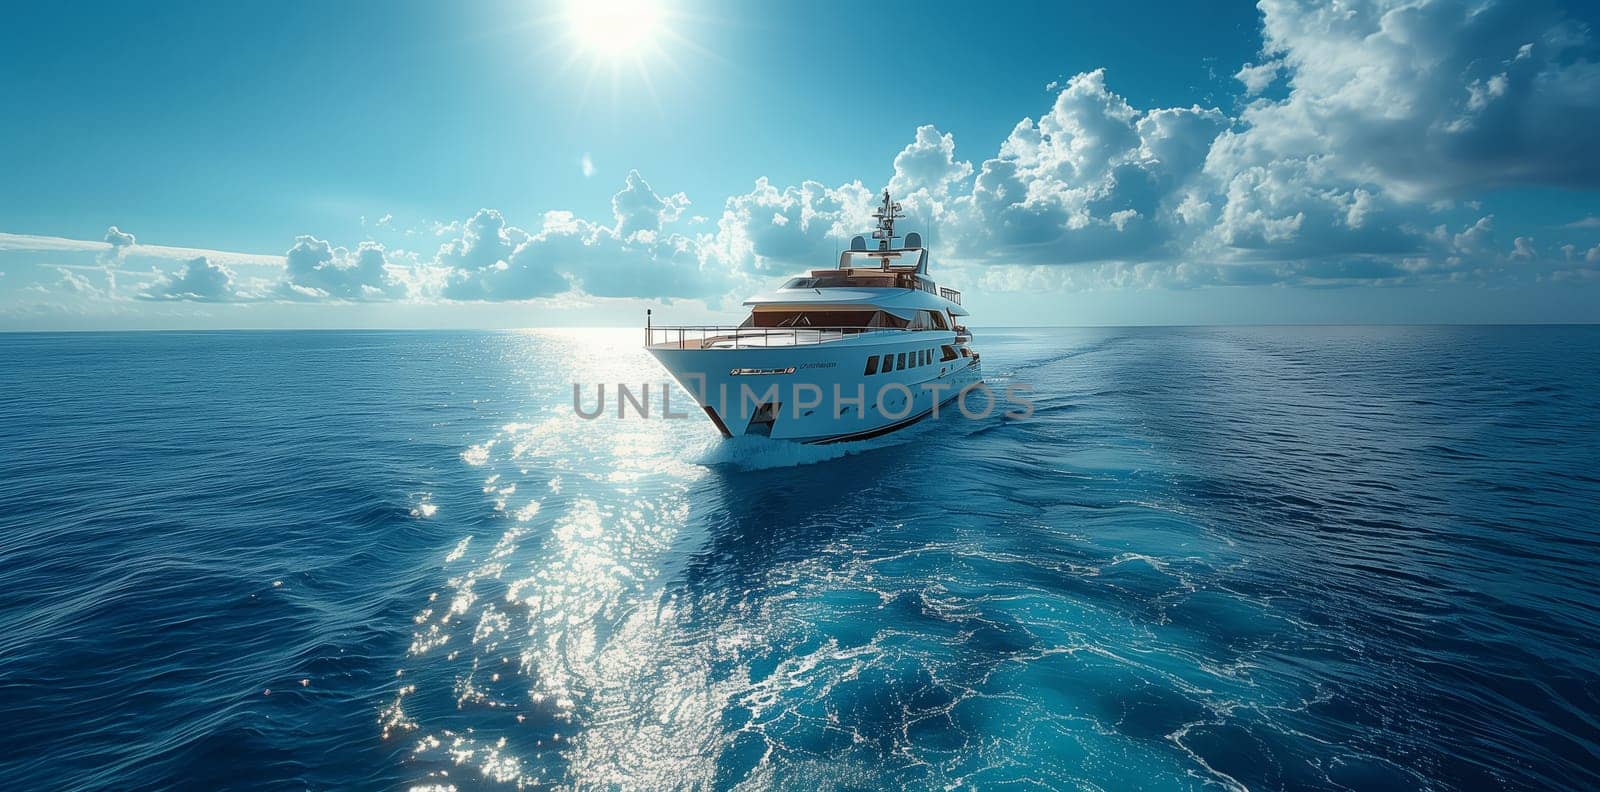 A luxurious boat is cruising on the vast expanse of water, showcasing the intricate design of naval architecture against the backdrop of the endless horizon and clear blue sky